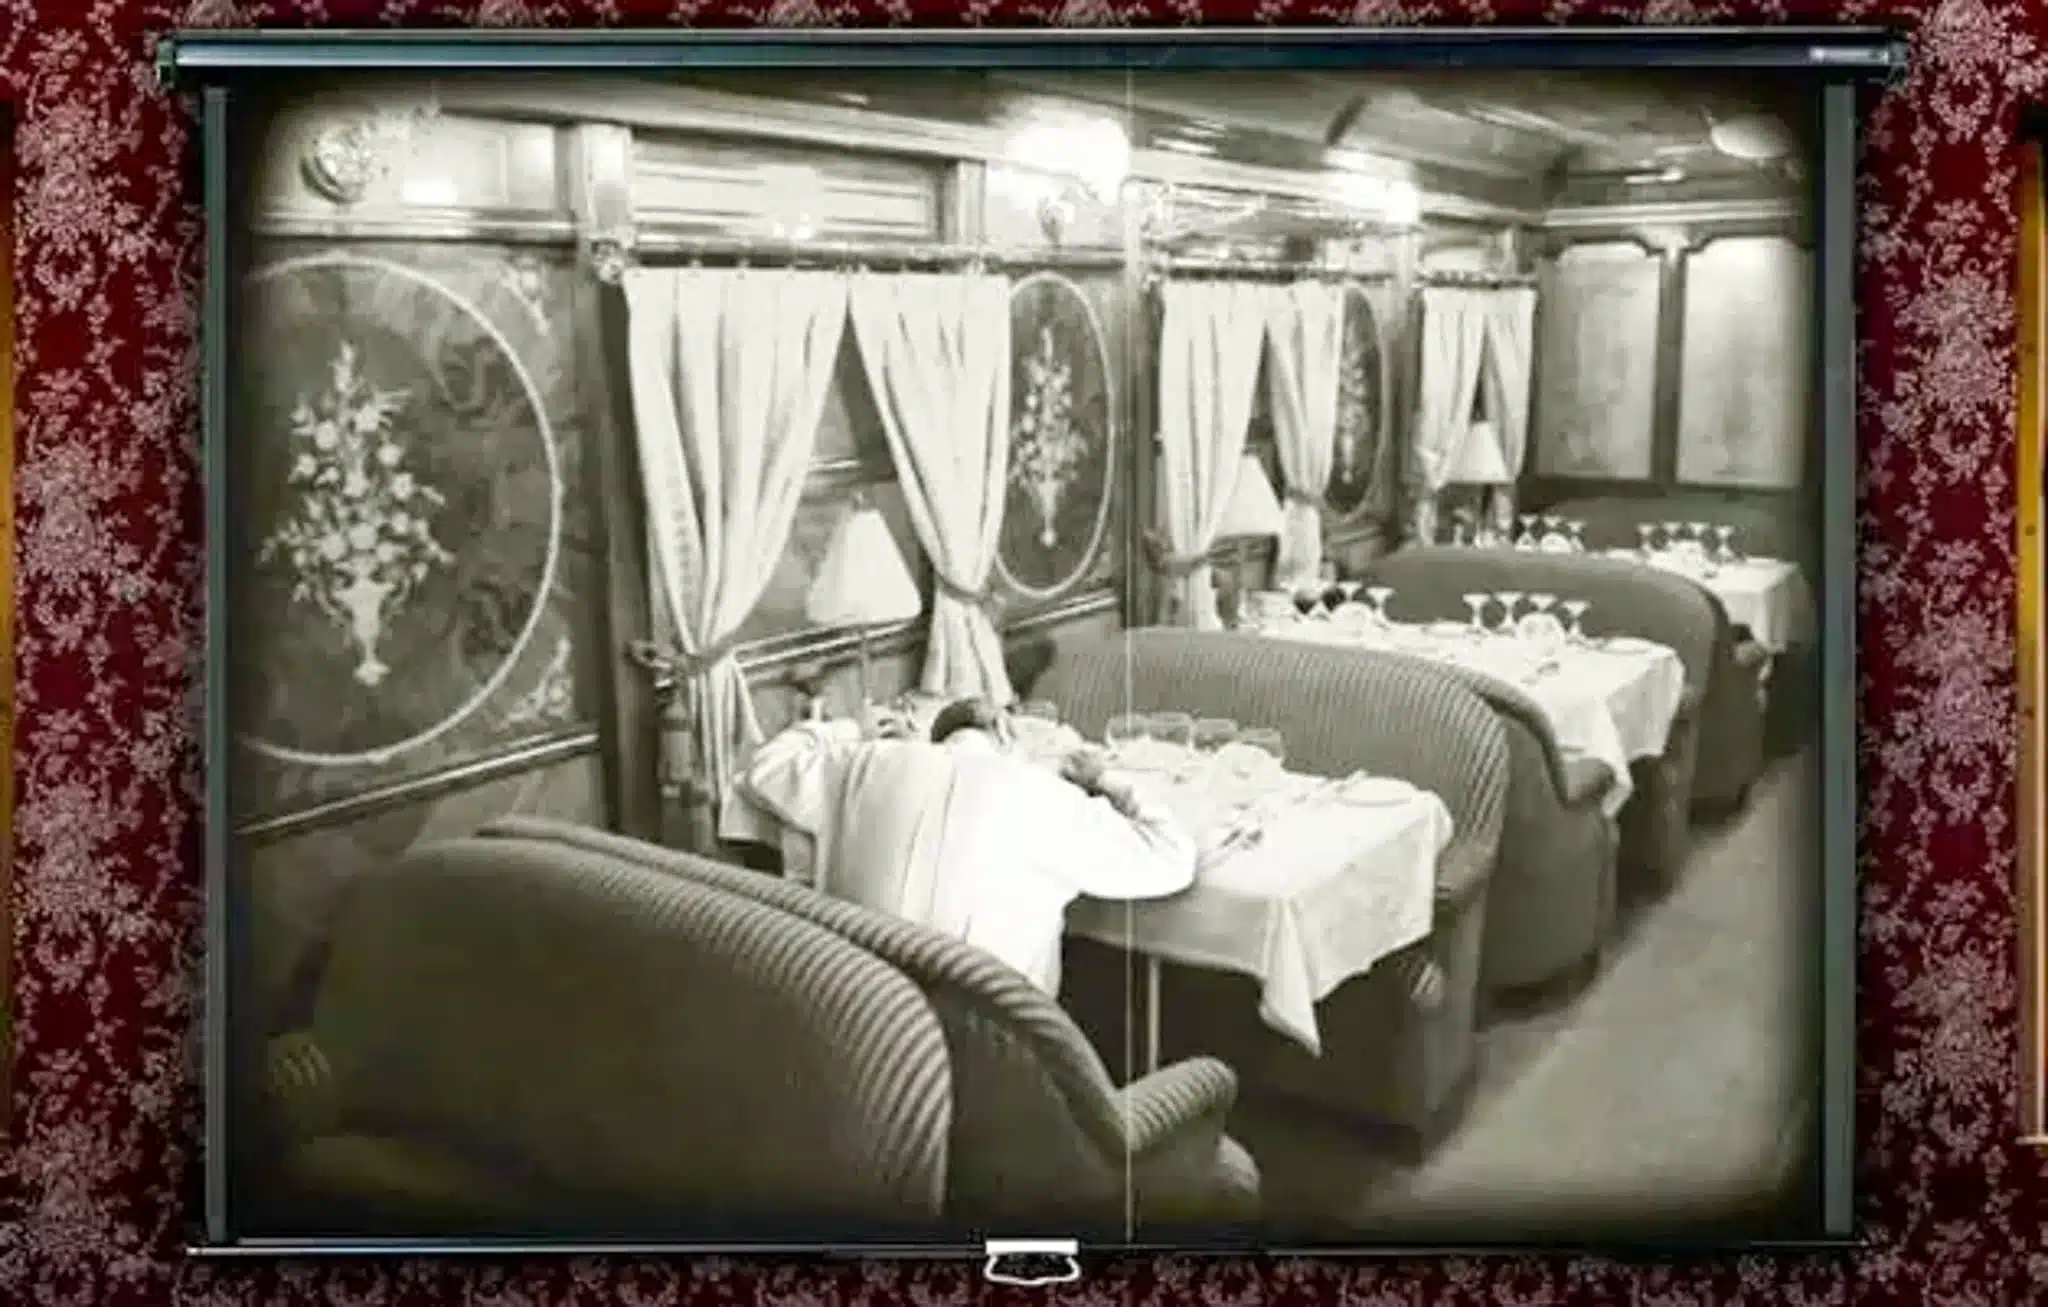 An old image of a train restaurant